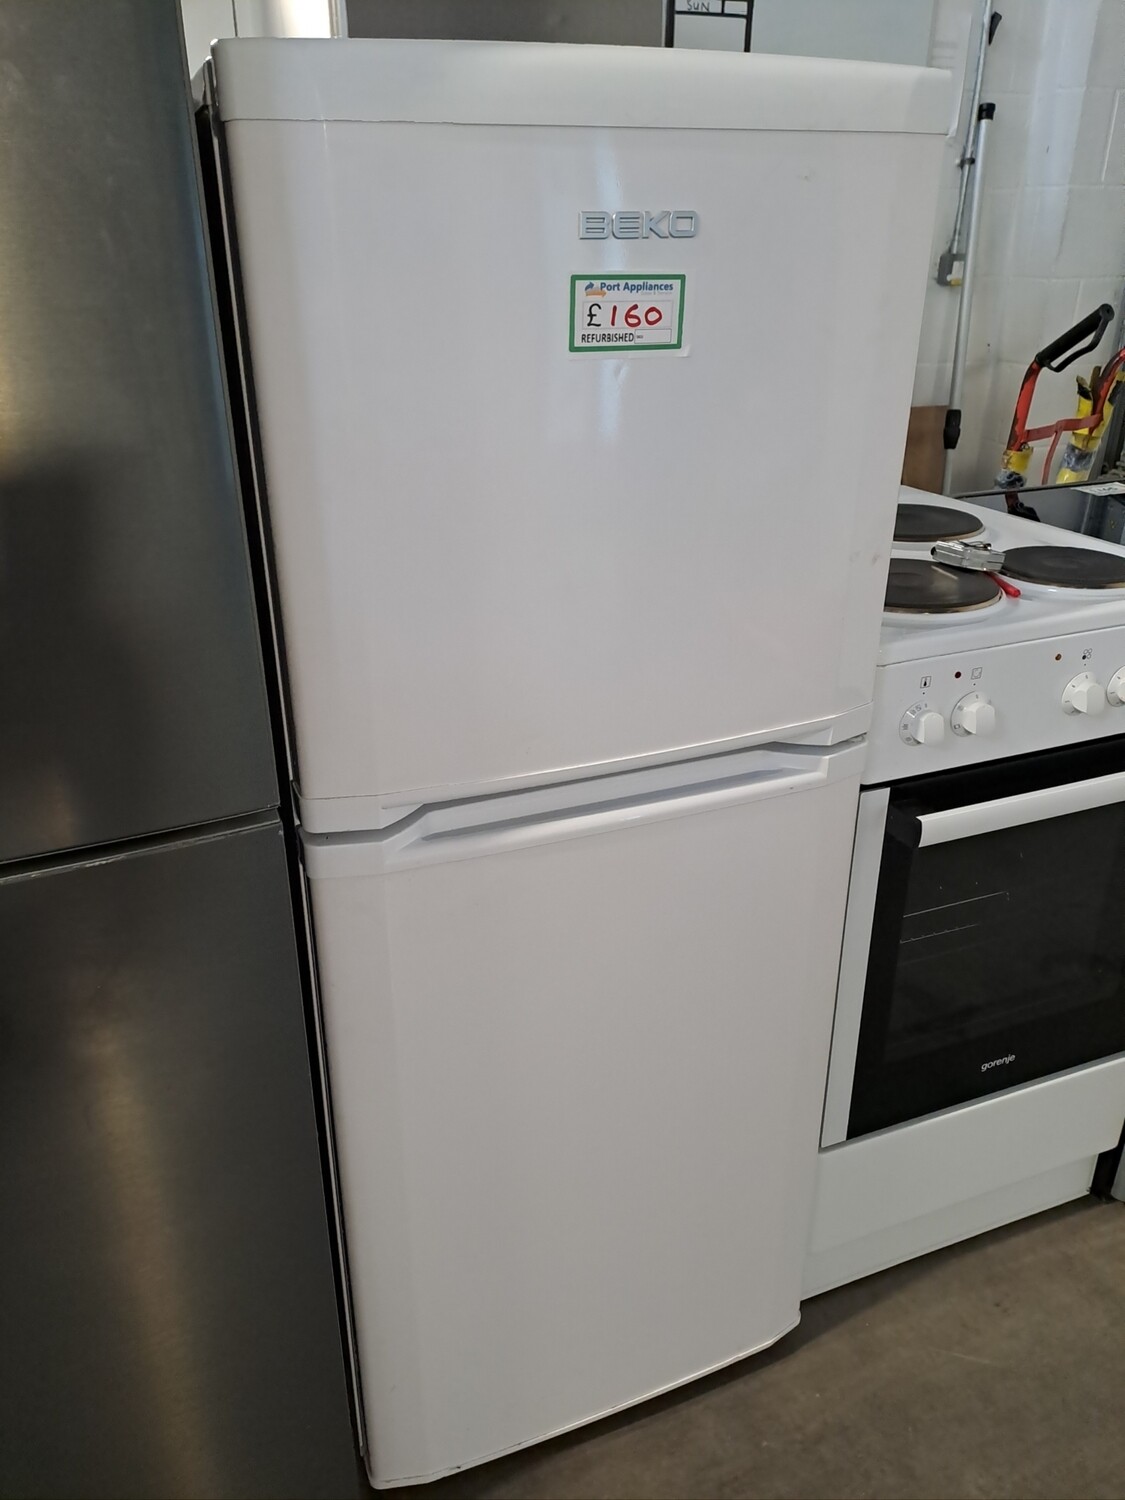 Beko TDA531W/1 Fridge Freezer White H138 x W55 x D60 Refurbished 6 Month Guarantee. This item is located in our Whitby Road Shop 